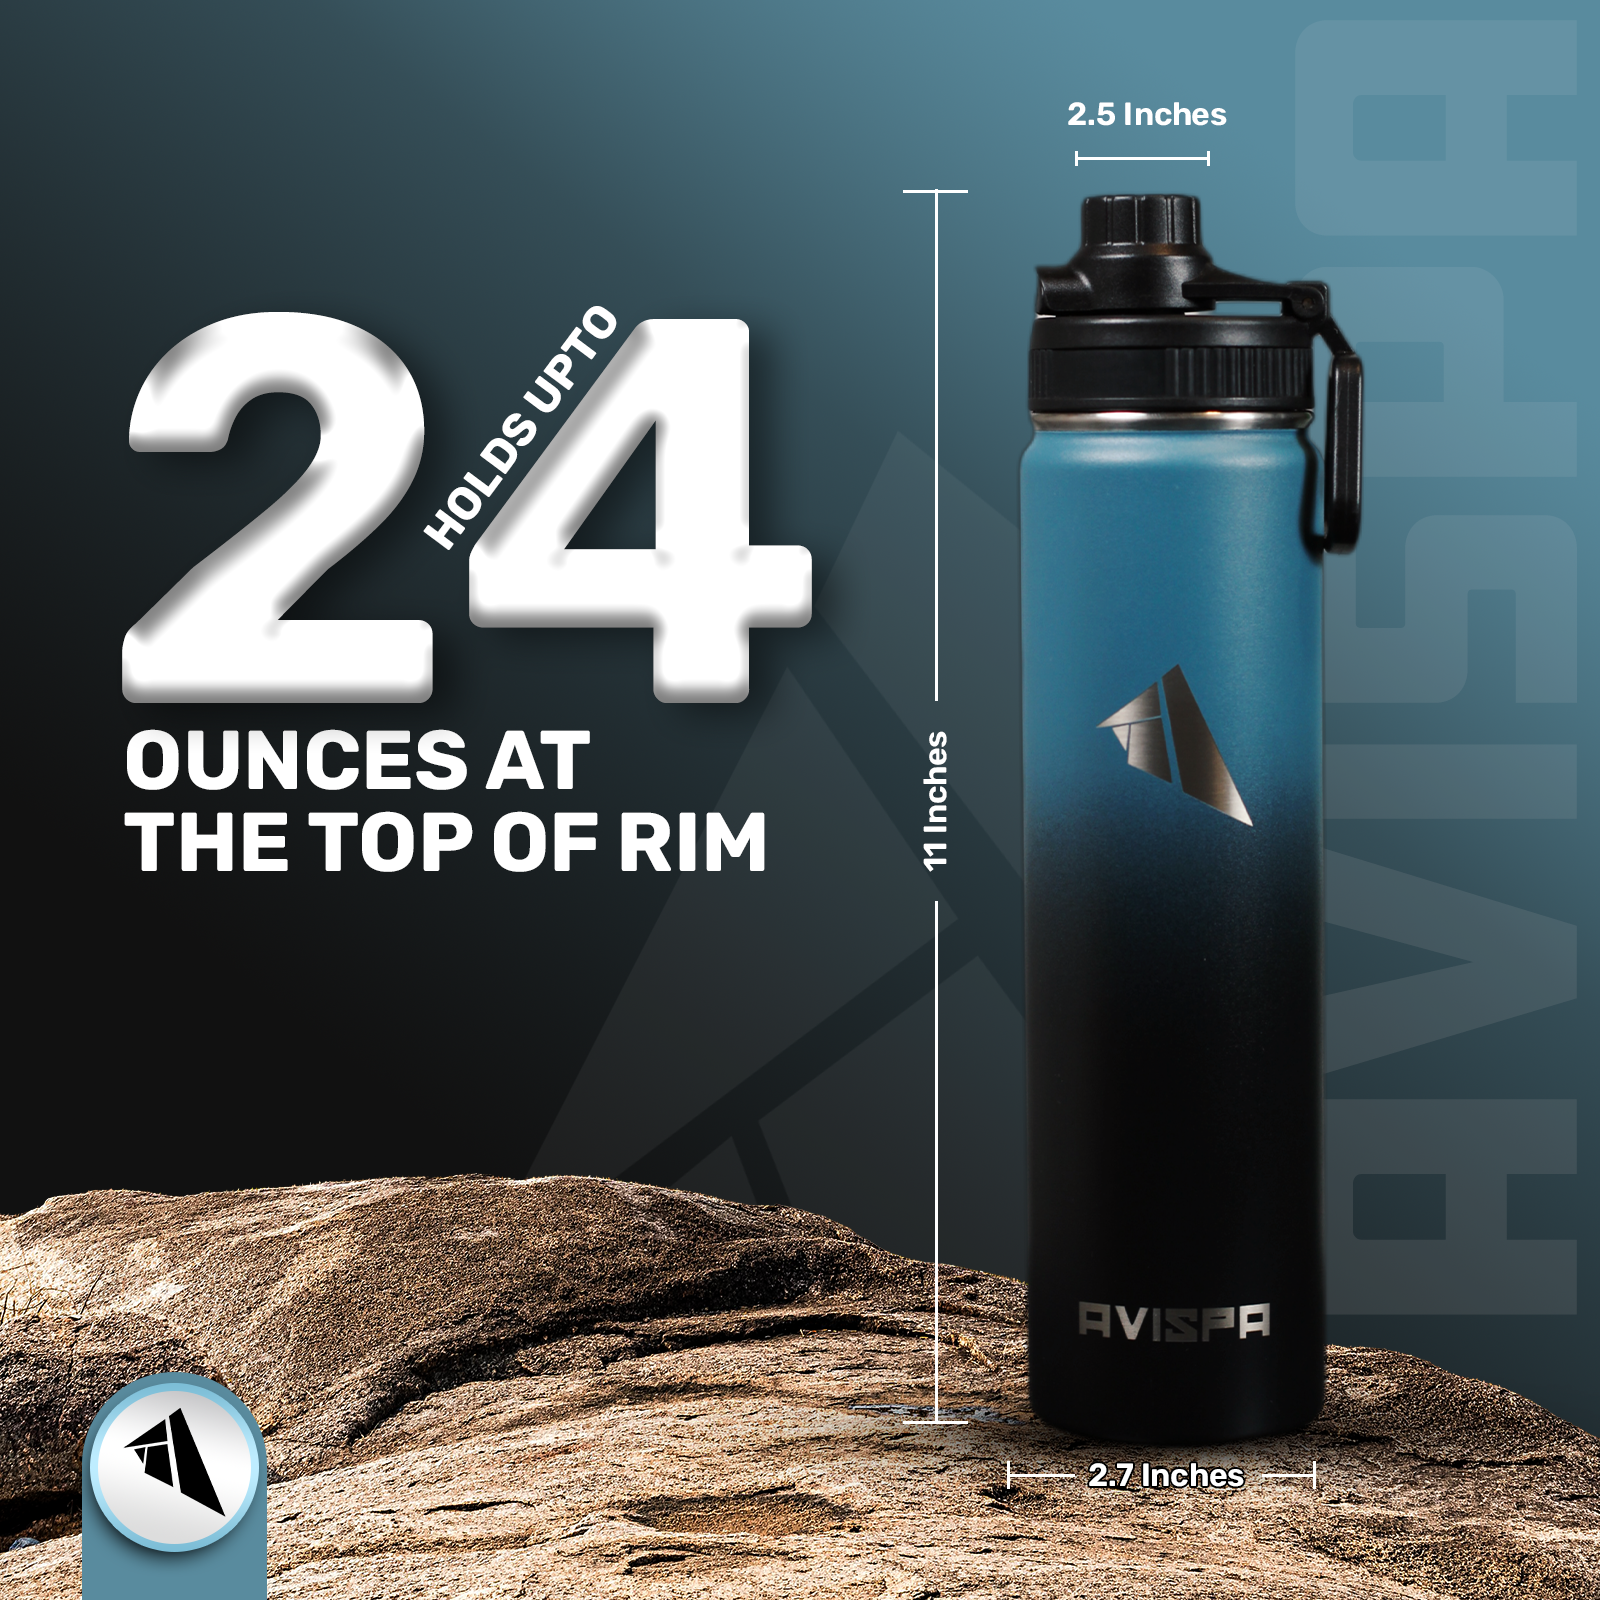 Stainless Steel Water Bottle Blue Gray and Black